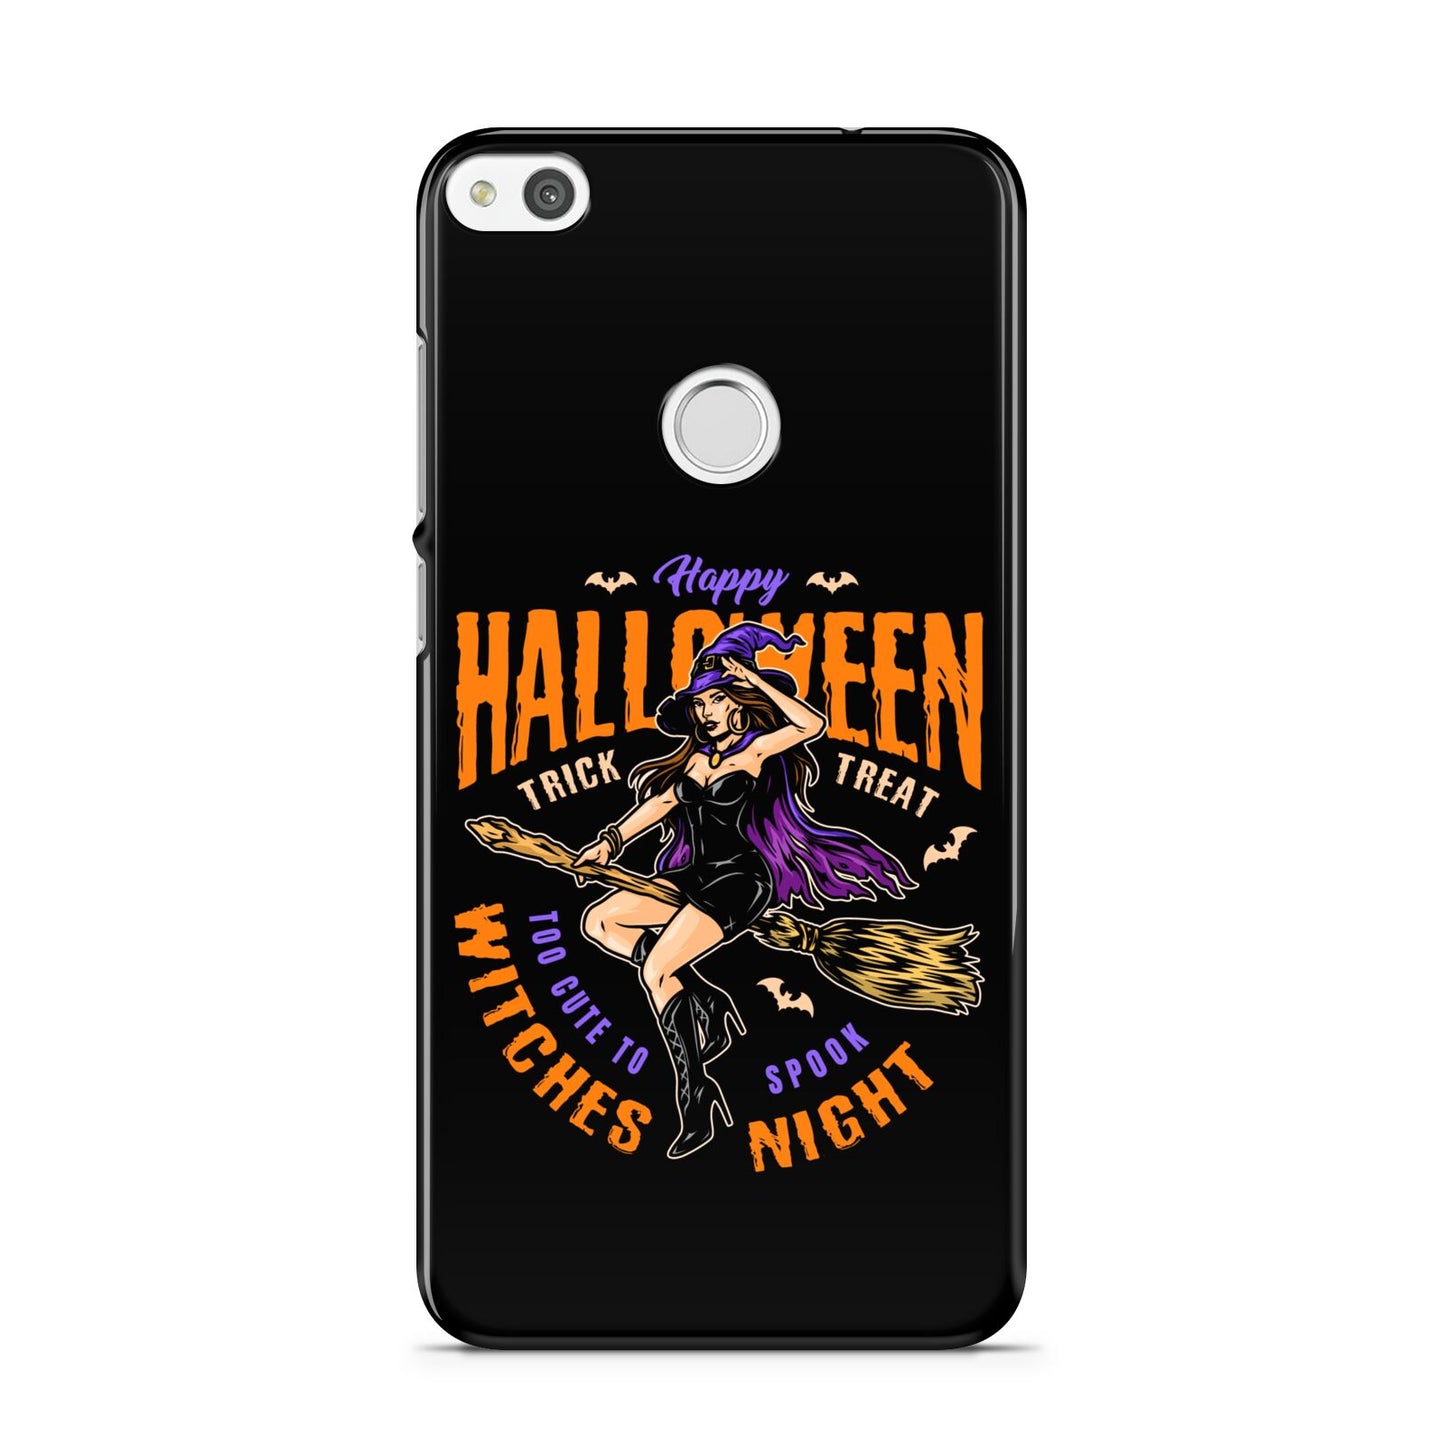 Witches Night Huawei P8 Lite Case